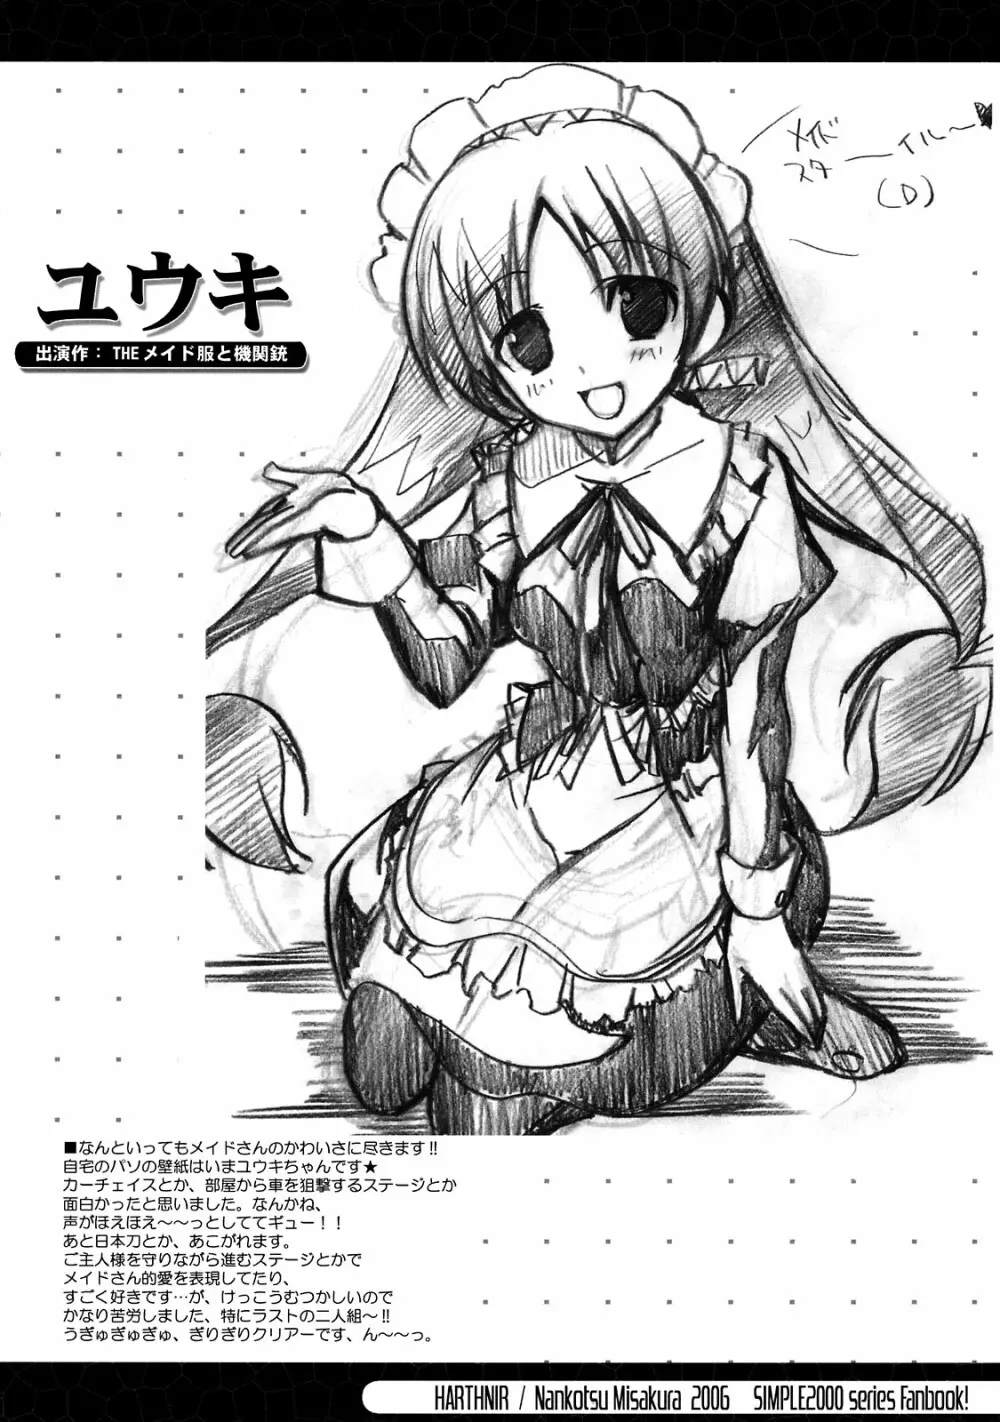 THE SIMPLE ギャル萌え同人誌 Illustration Side Page.4